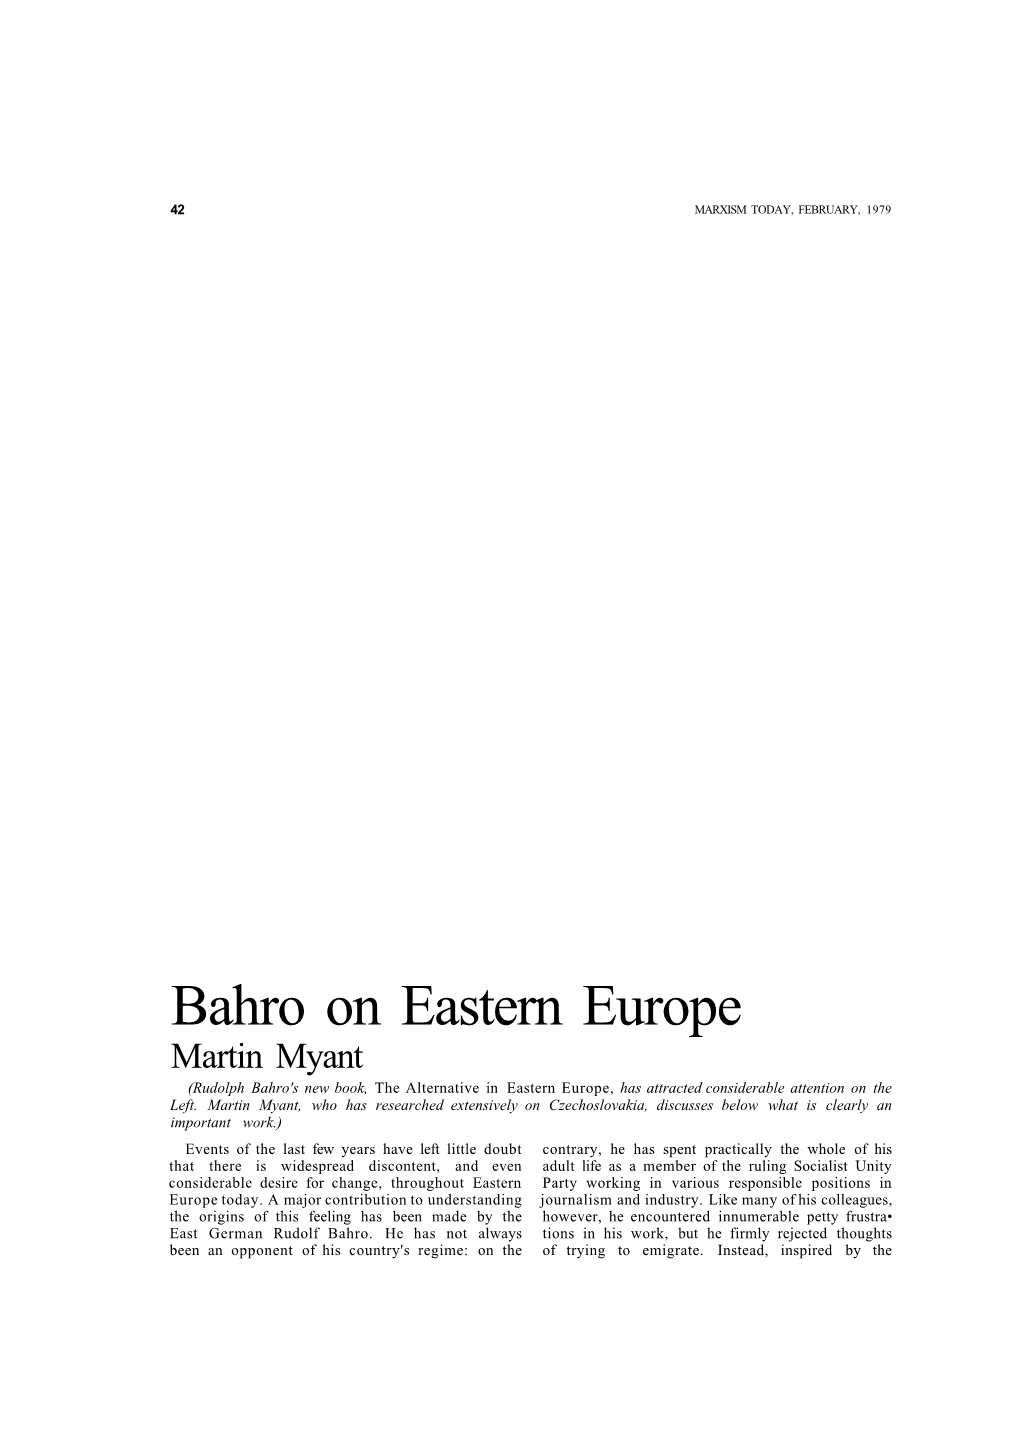 Bahro on Eastern Europe Martin Myant (Rudolph Bahro's New Book, the Alternative in Eastern Europe, Has Attracted Considerable Attention on the Left